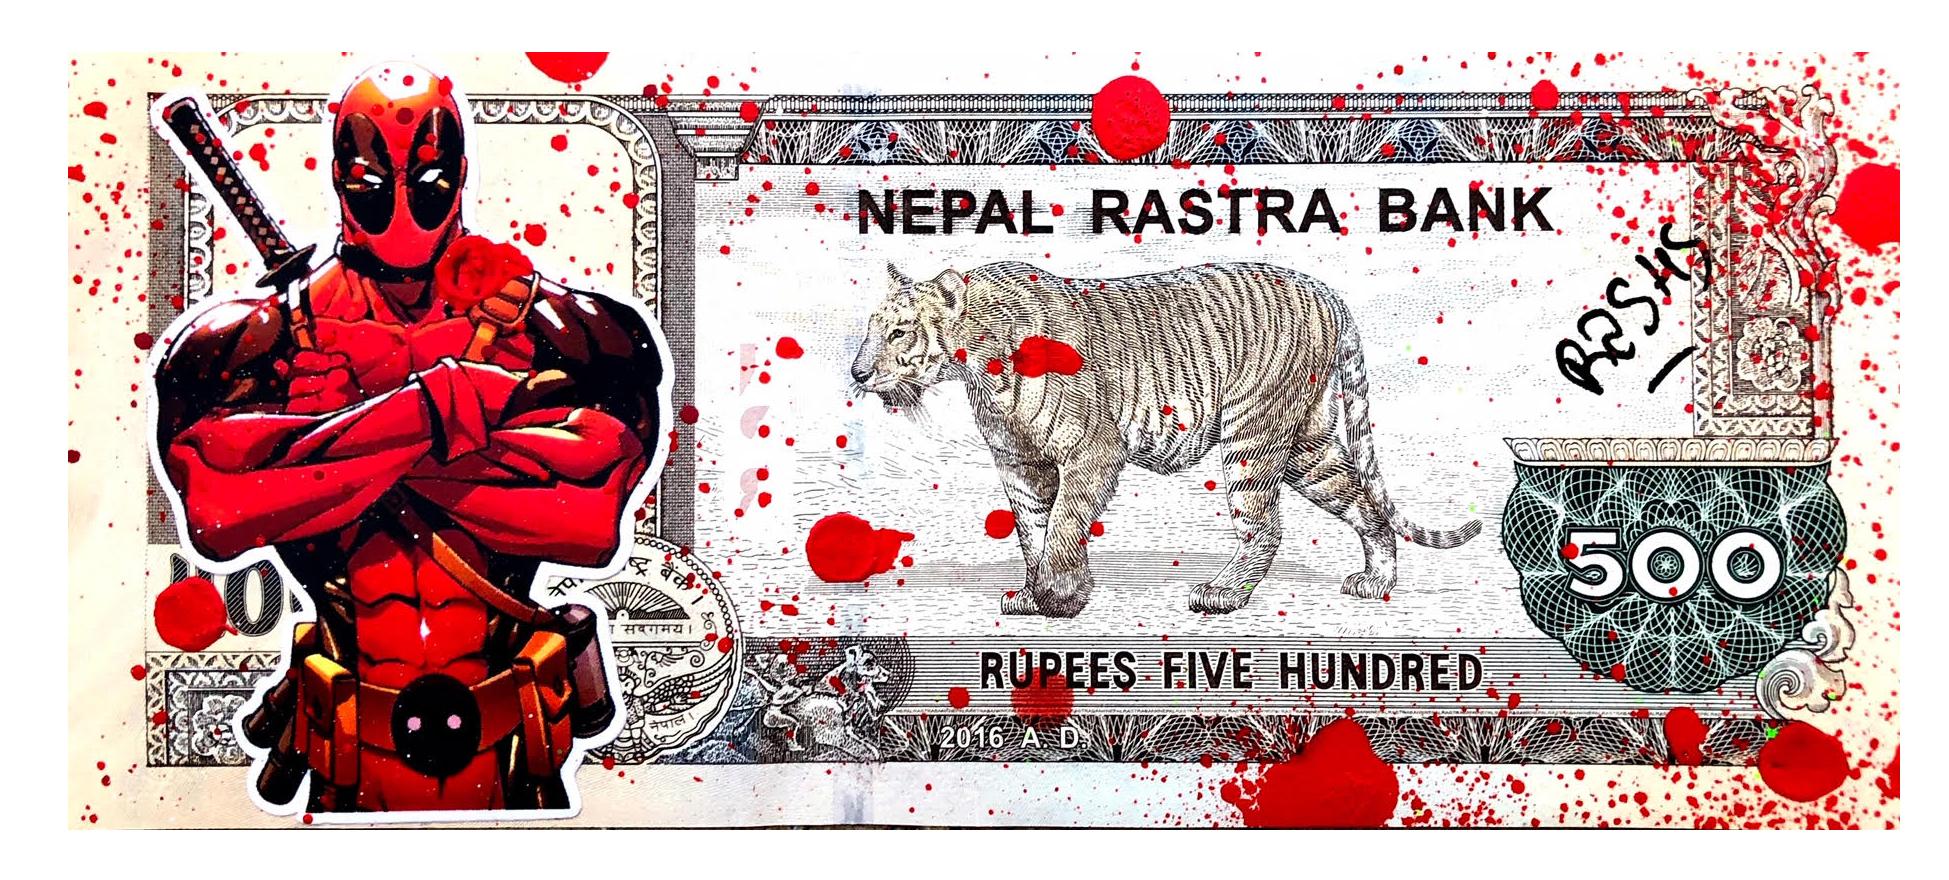 2018
Mixed Media 
Authentic Nepalese banknote of 500 rupees
Mount Everest Tiger, Thyangbosh Monastery
16 X 7 cm
Neat sending, with certificate from the artist